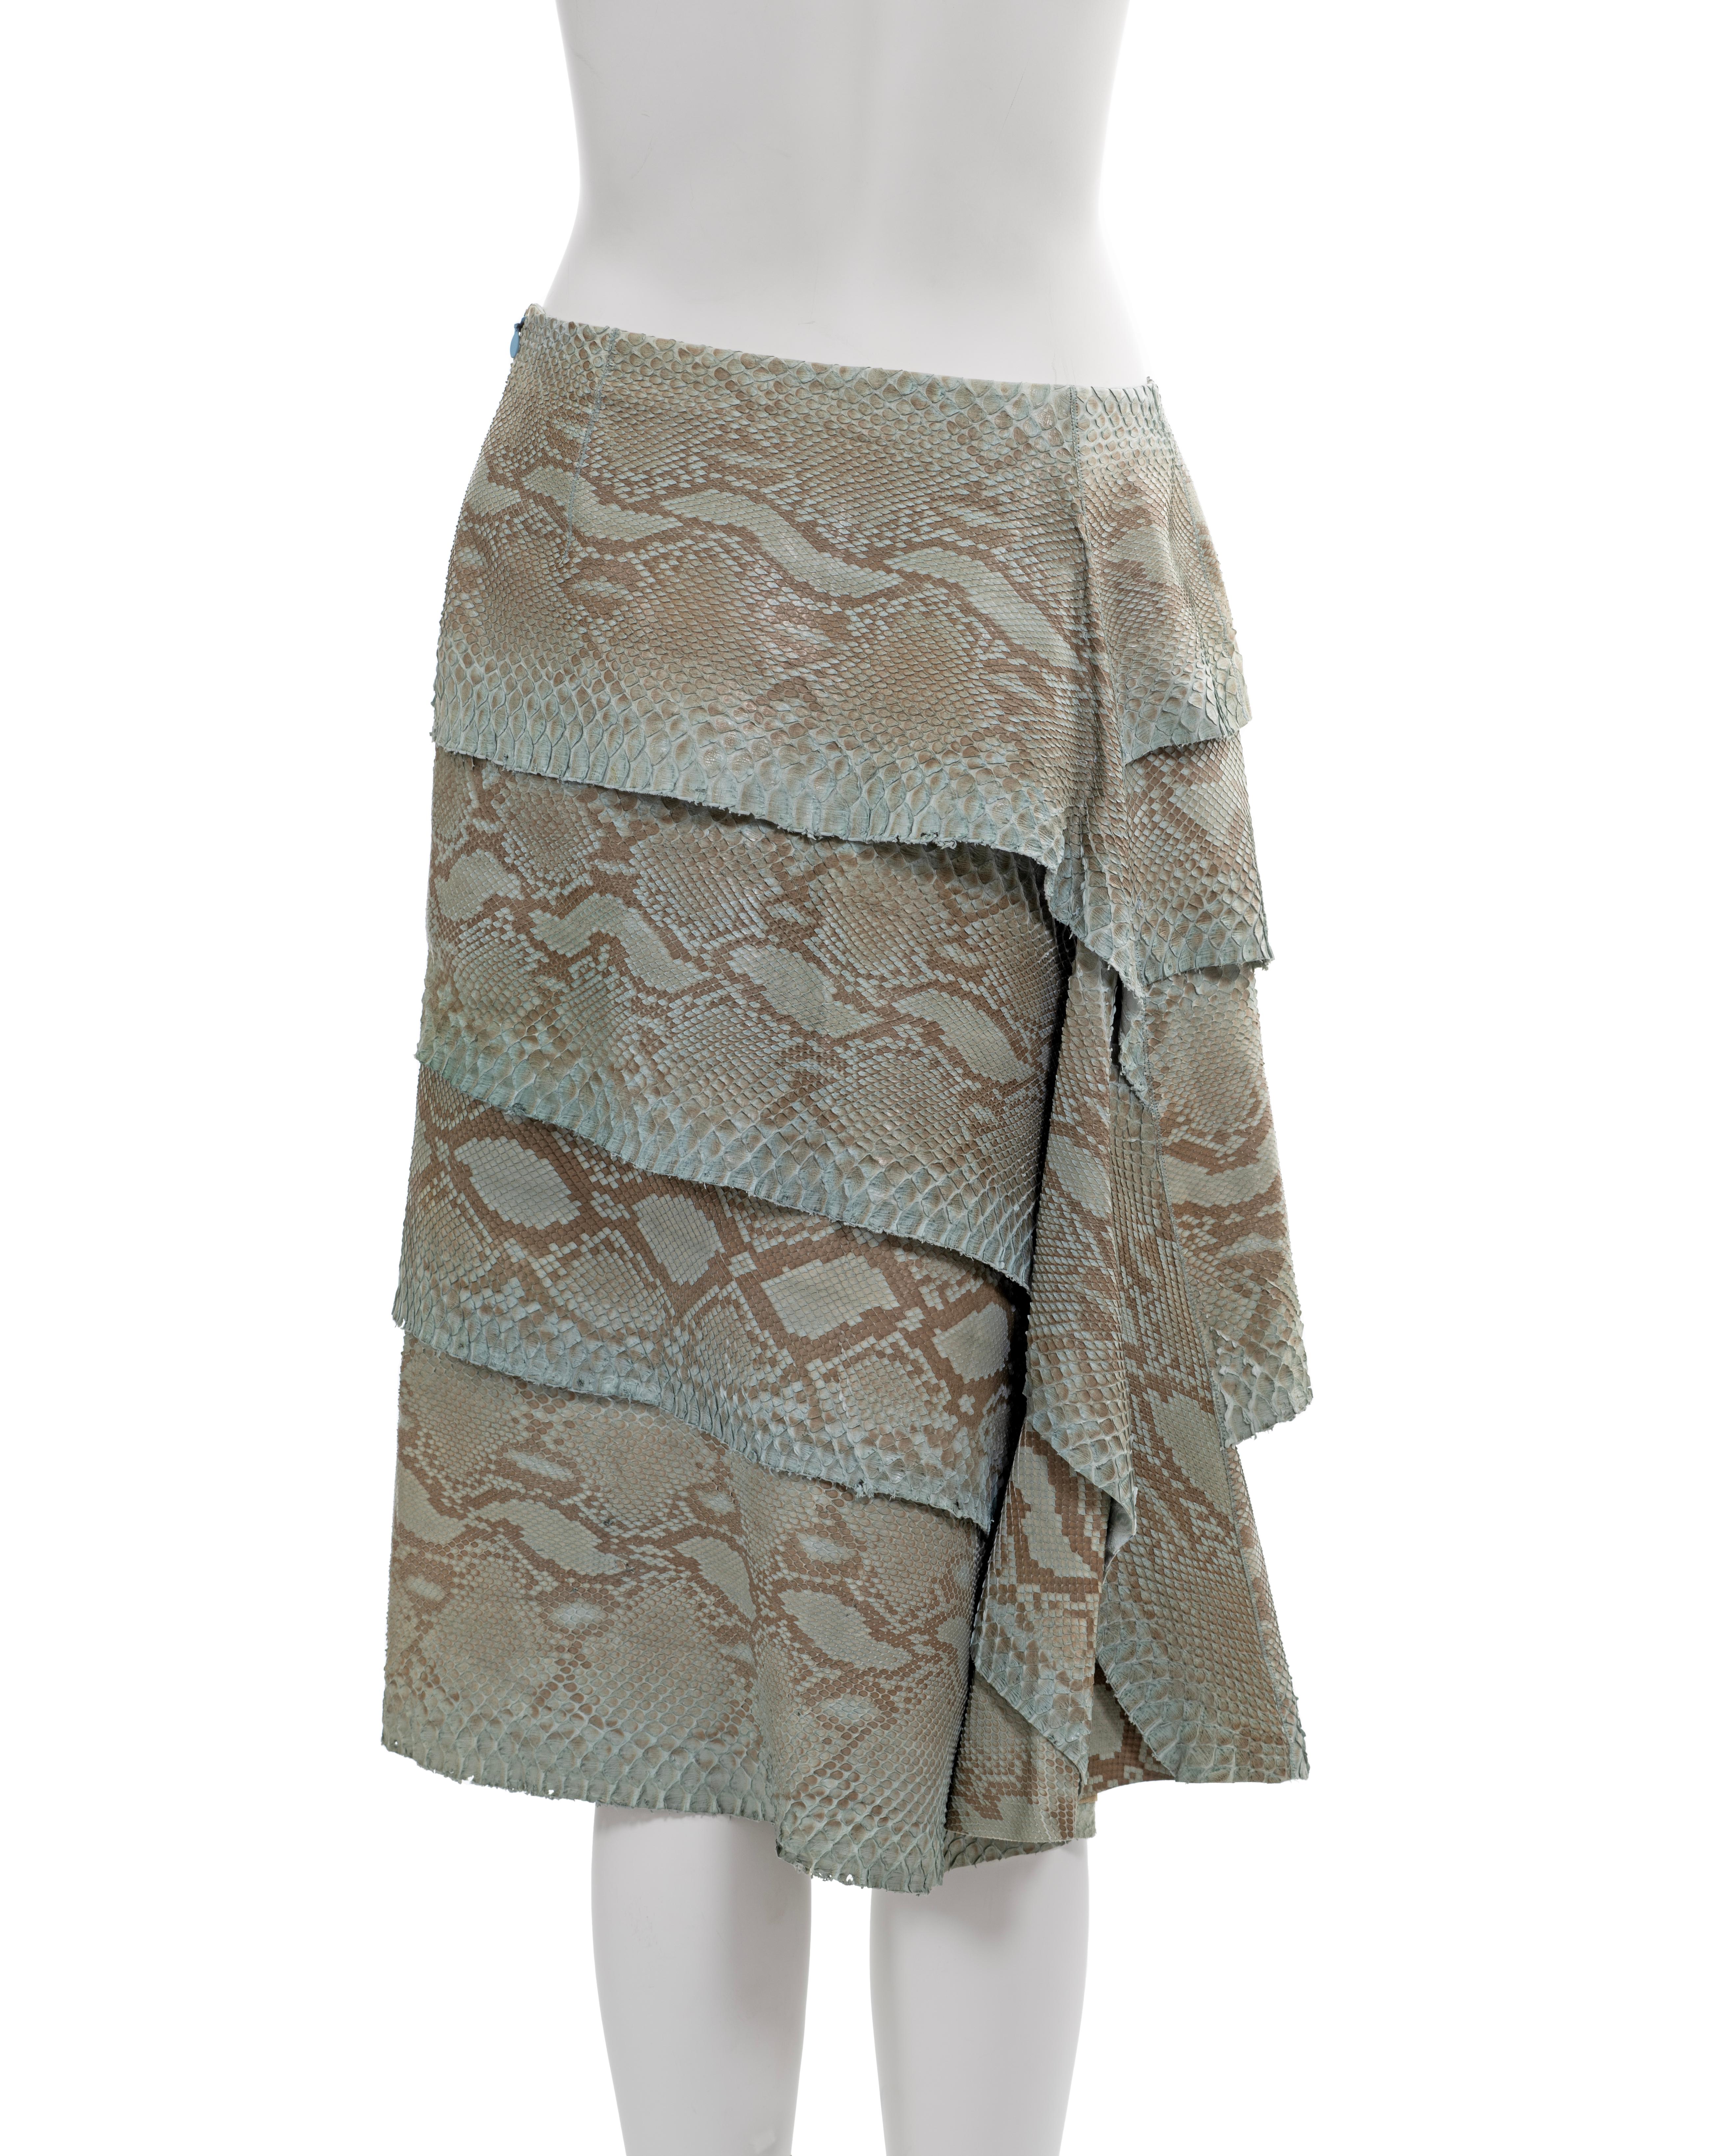 Gianni Versace turquoise python tiered skirt, fw 1999 For Sale 6